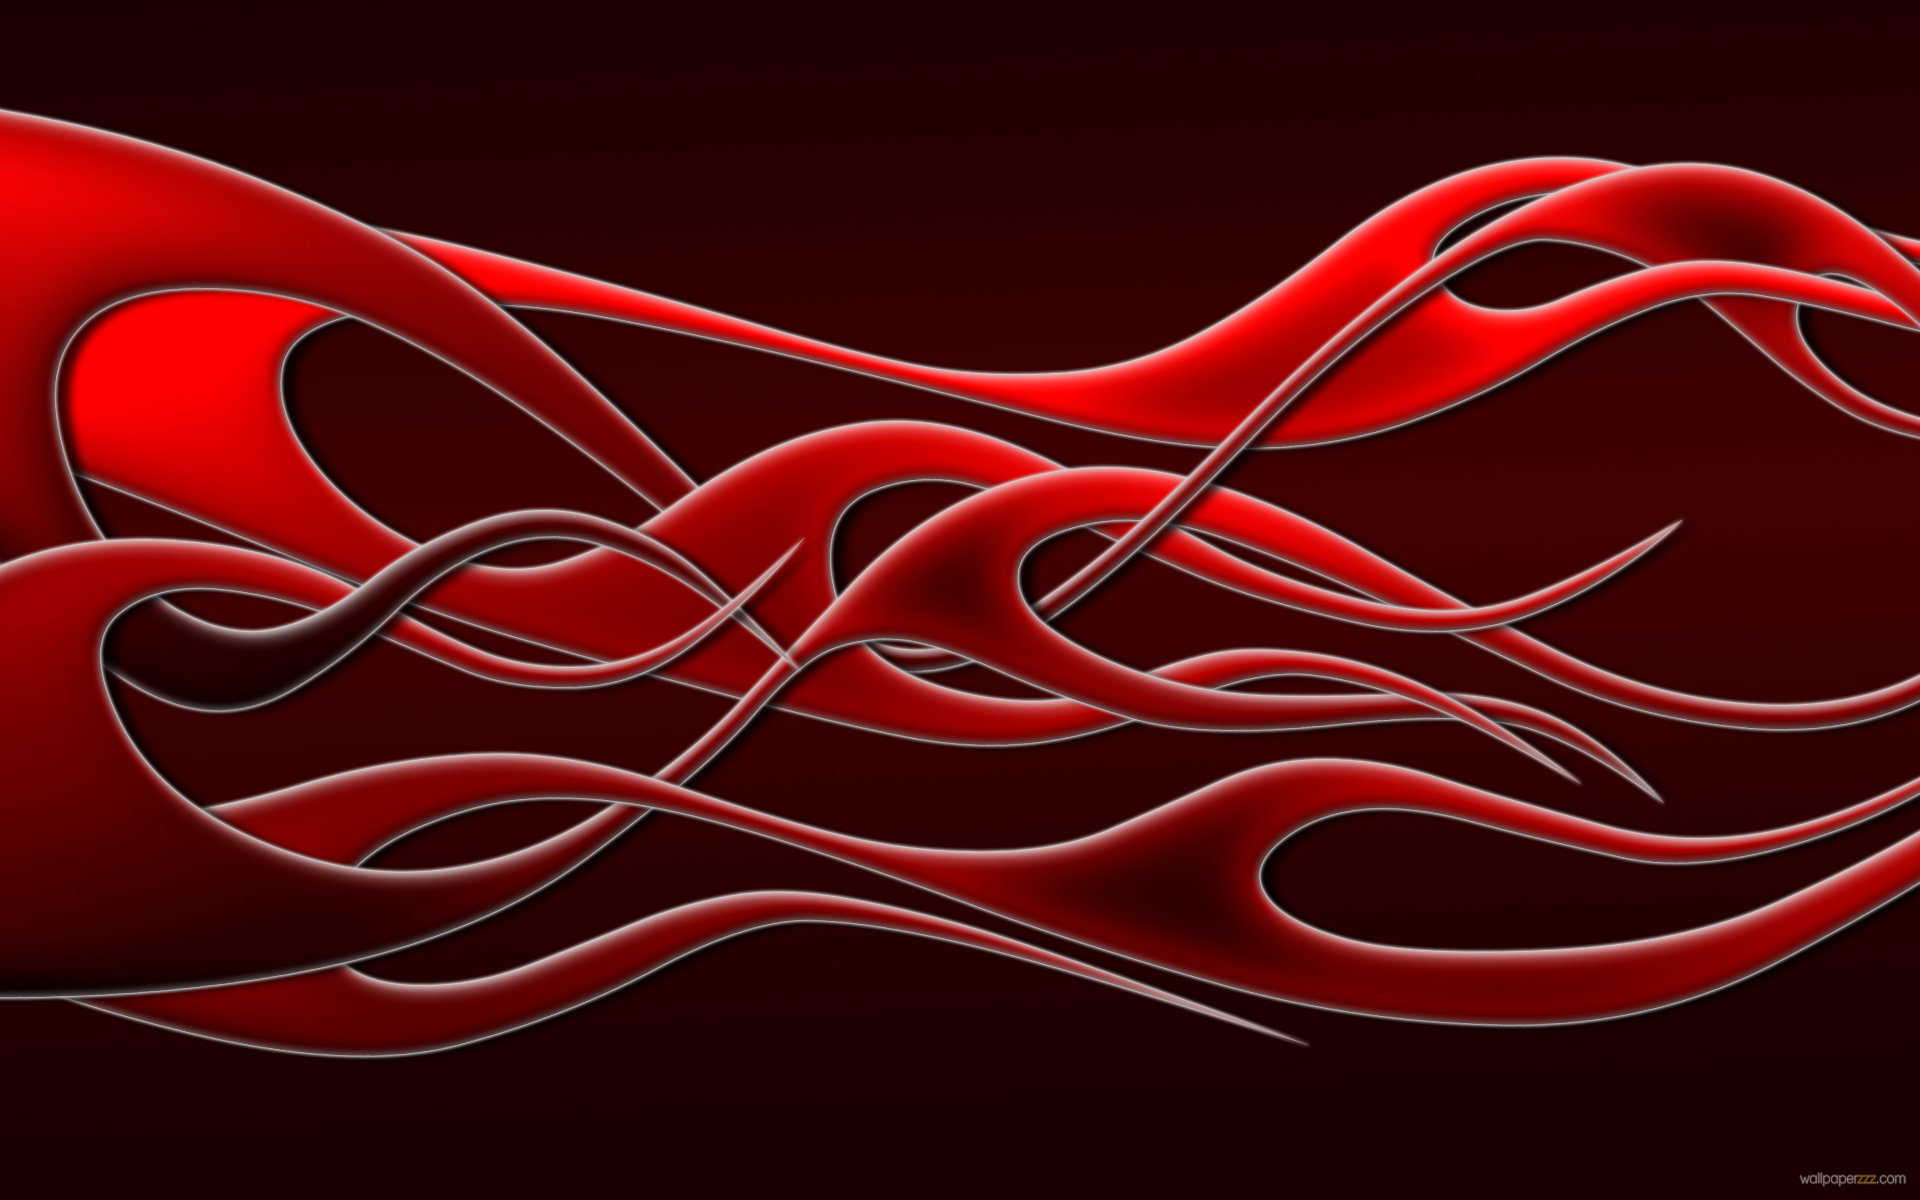 Blue Flames Red And Pin Flame Hd Widescreen High Definition 1366x768 1920x1200